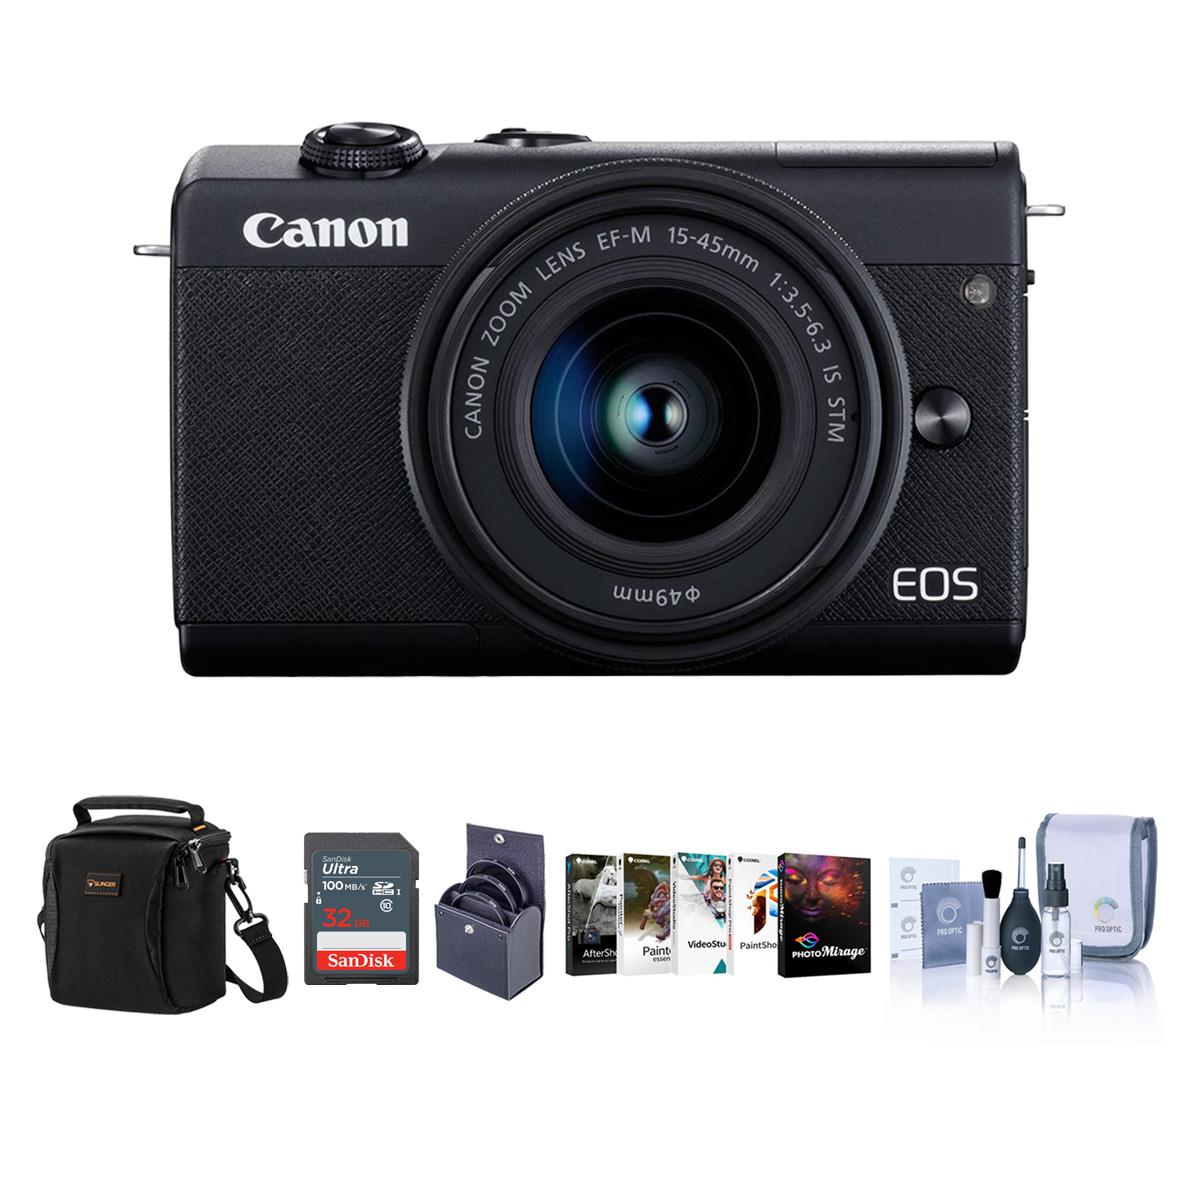 Image of Canon EOS M200 Mirrorless Camera with EFM 15-45mm f/3.5-6.3 Lens Black W/ACC KIT